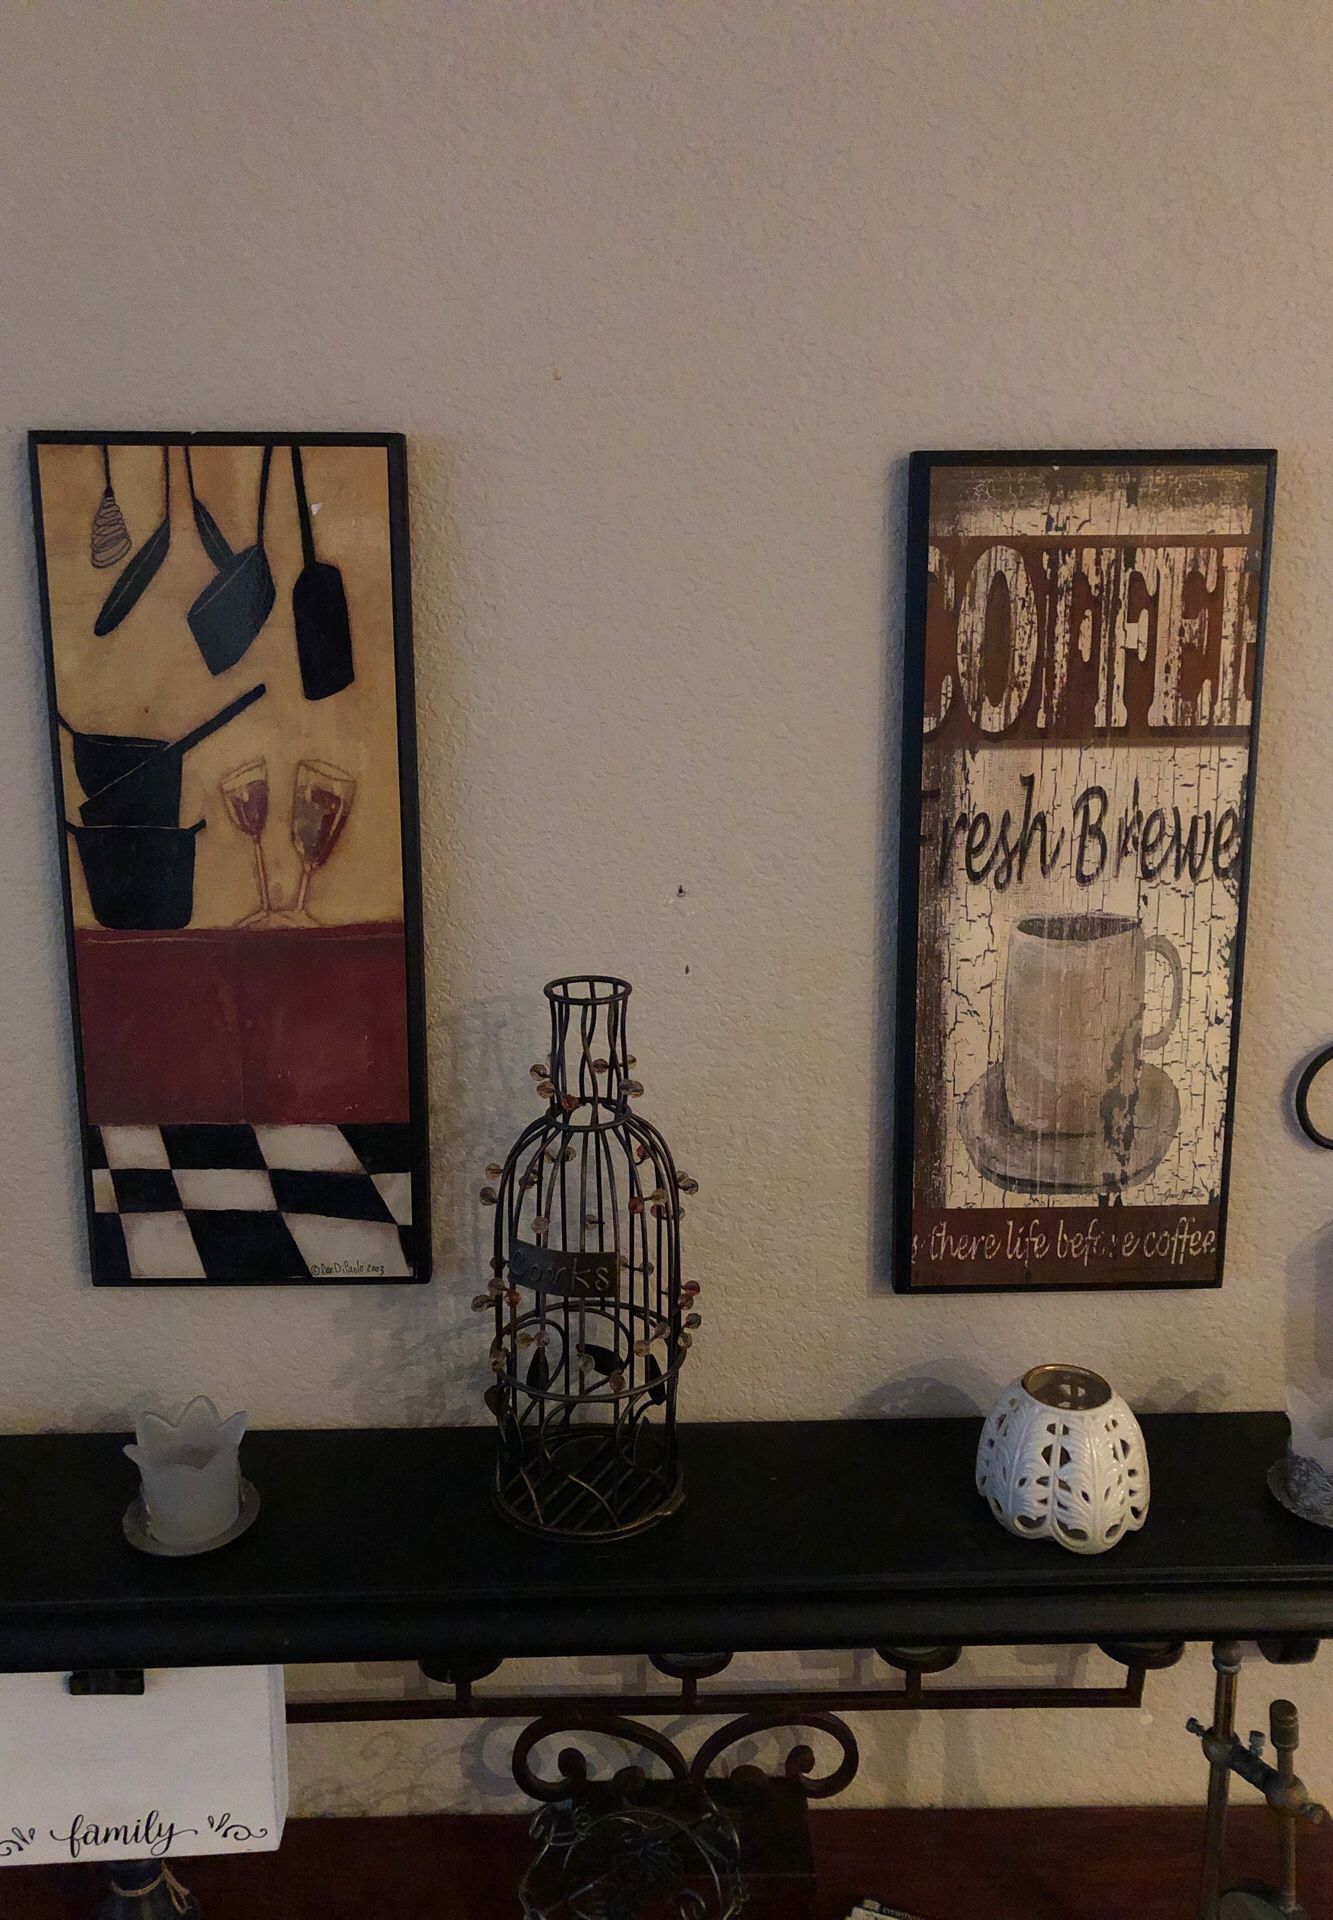 To picture frames metal wire corks bottle 2 rod iron sconces with candles.